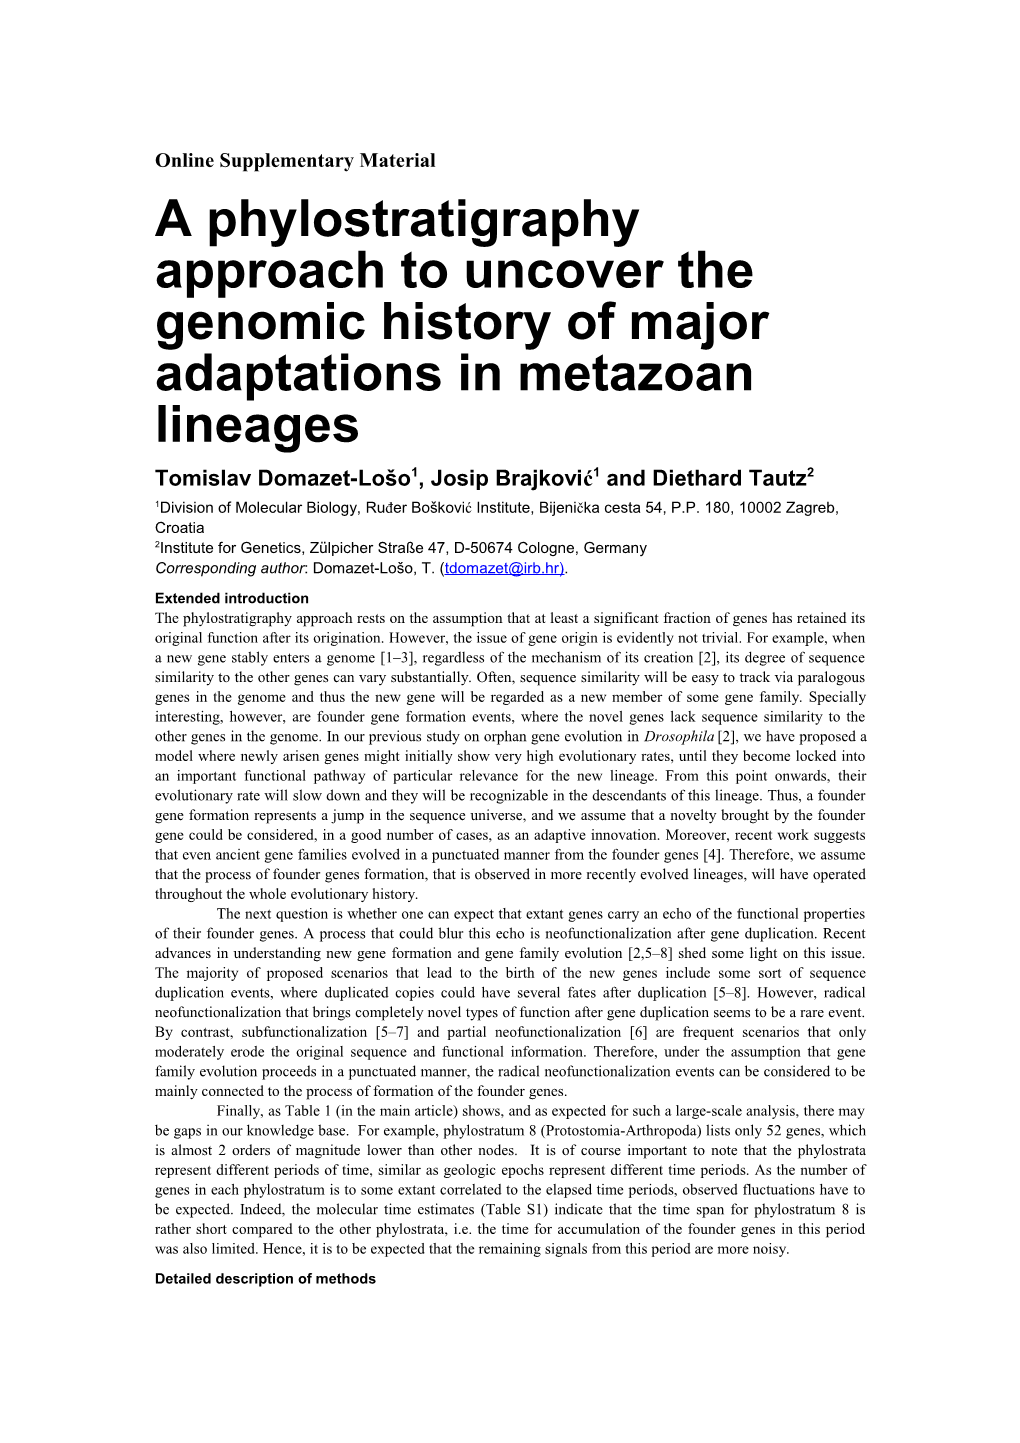 A Phylostratigraphy Approach to Uncover the Genomic History of Major Adaptations in Metazoan